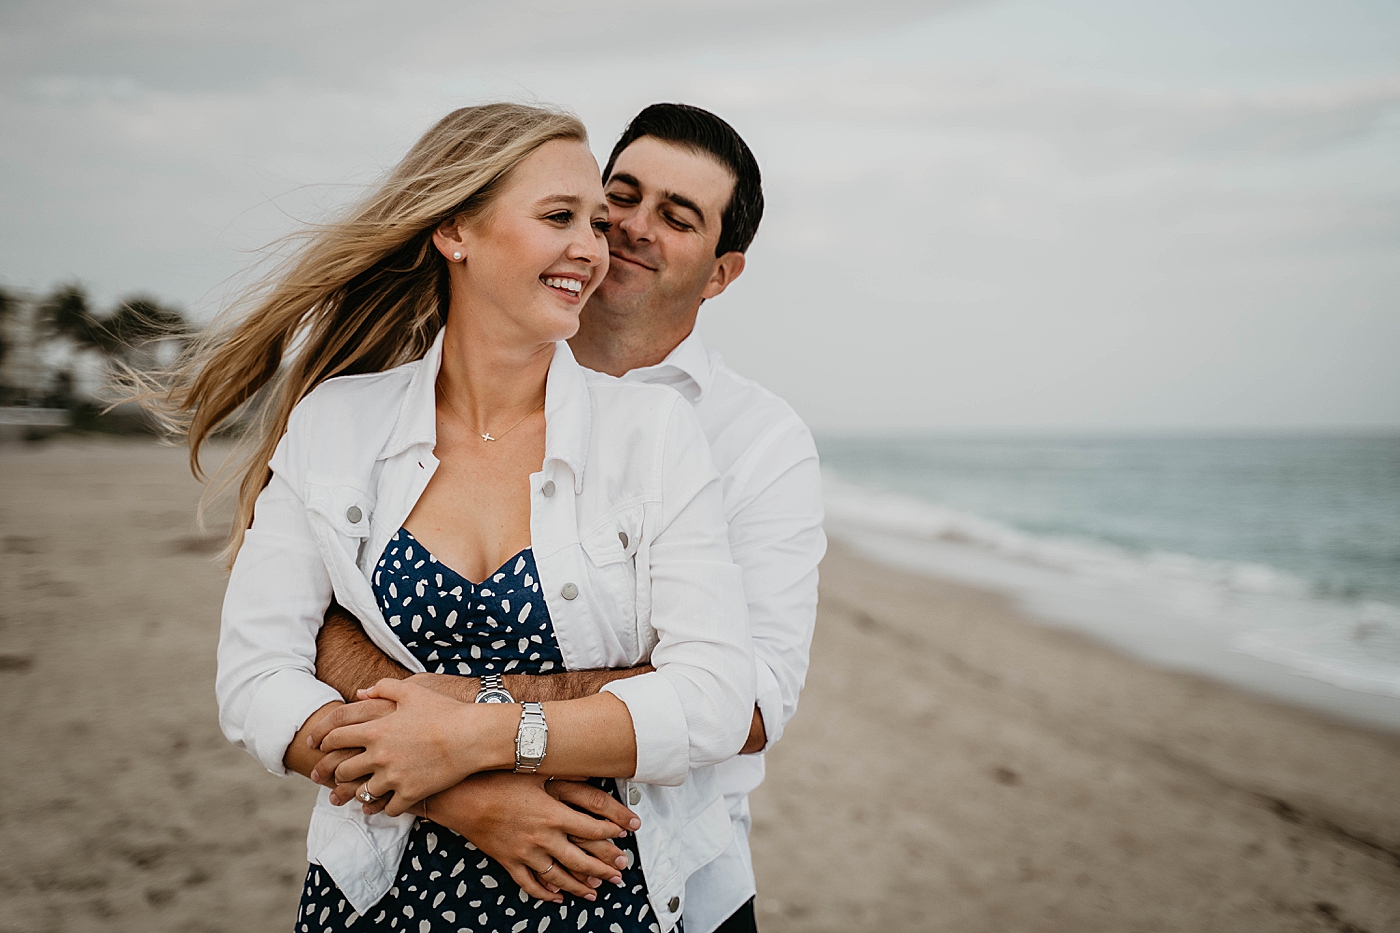 Man holding lady on the beach Palm Beach Engagement Photography captured by South Florida Engagement Photographer Krystal Capone Photography 